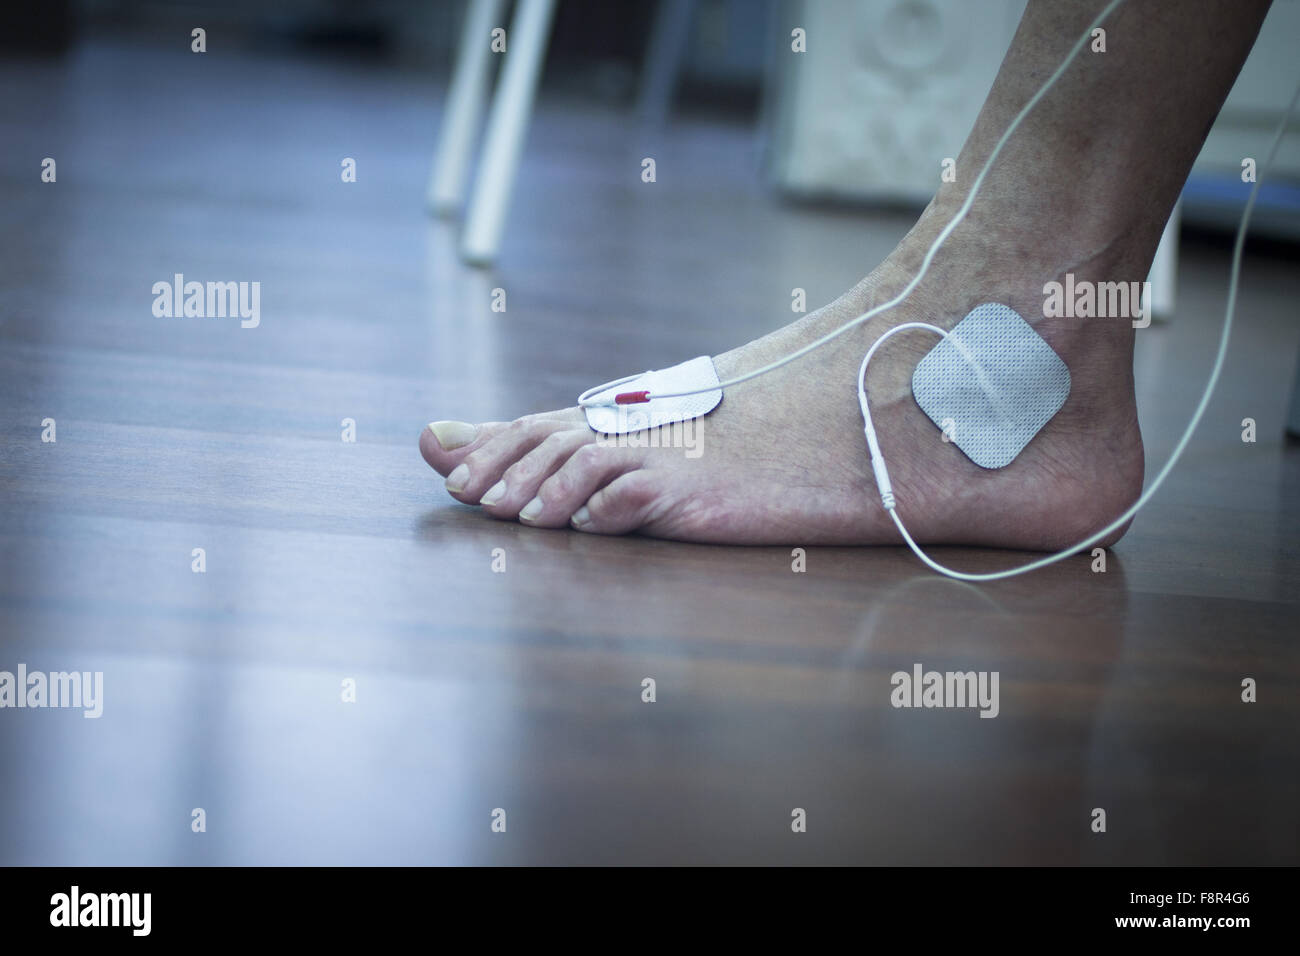 How to Treat an Ankle Sprain with Electrostimulation